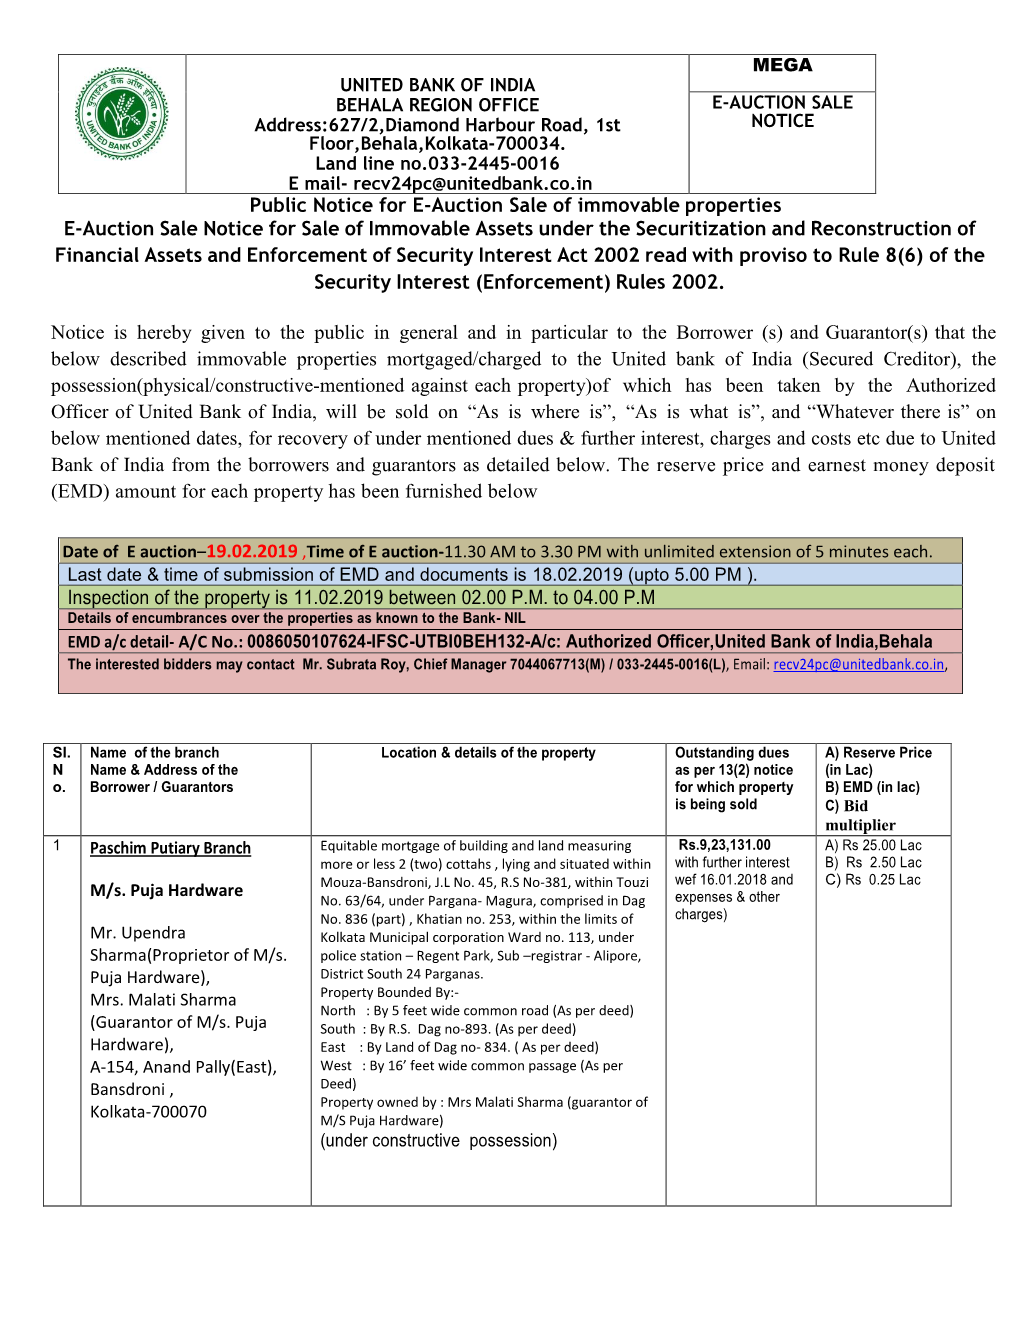 Public Notice for E-Auction Sale of Immovable Properties E-Auction Sale Notice for Sale of Immovable Assets Under the Securitiza